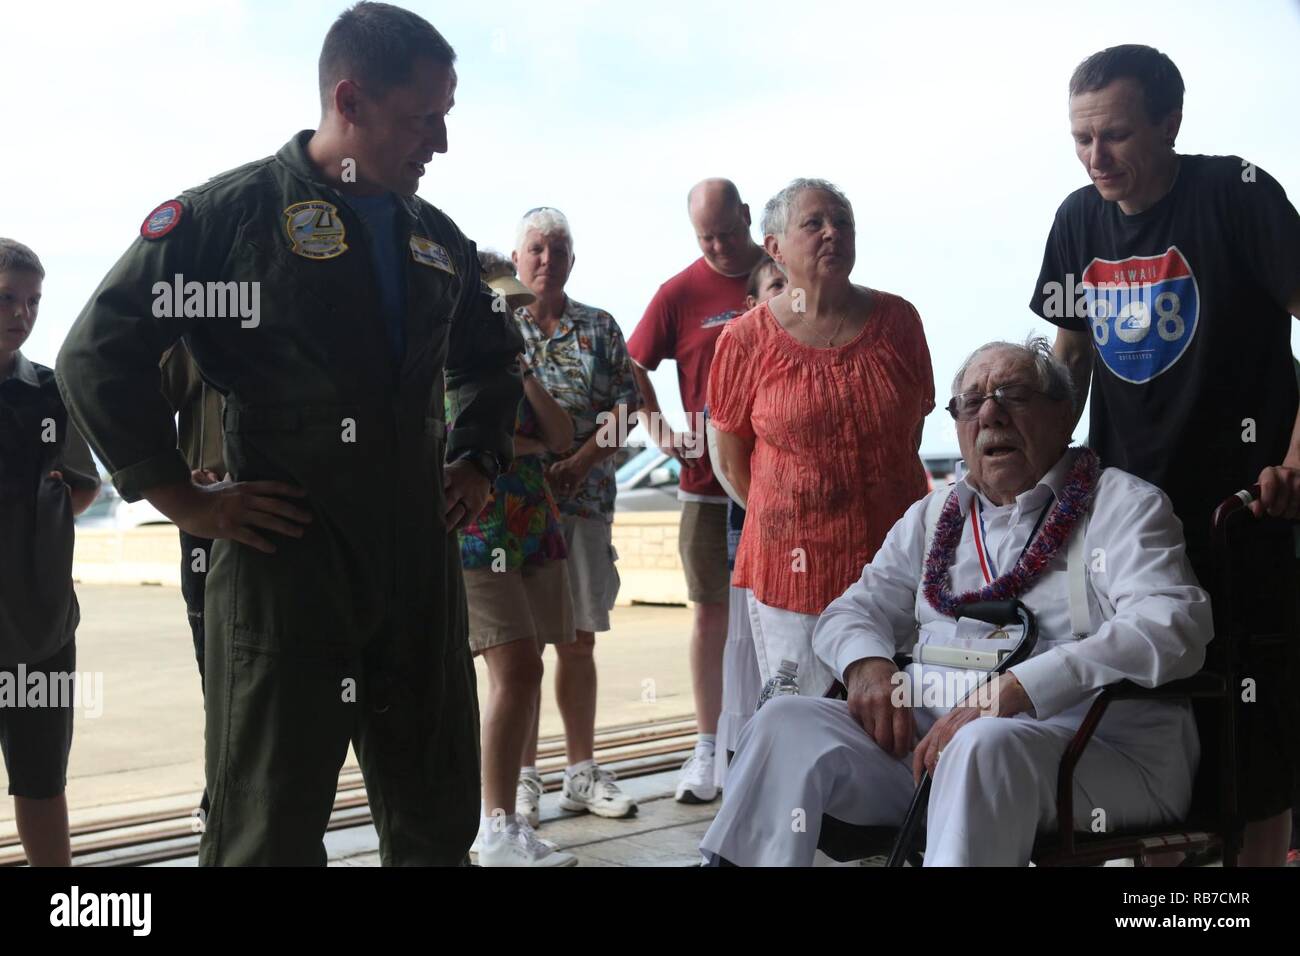 Melvin Heckman, a Pearl Harbor survivor, speaks with Cmdr. Jeffrey Bowman, the executive officer of Patrol Squadron 9, at Hangar 104 aboard Marine Corps Base Hawaii, December 2, 2016. Heckman is known for rescuing sailors from the USS Arizona during the attack on Pearl Harbor after the ship was attacked by Japanese Zeros. 'I reached out to grab a man's hand to help him up and take him to the island,' said Heckman, a Sheridan, Wyoming, native. 'I got him out of the water and saw that everything below his belly button was missing; he died in my arms'  Heckman was awarded a purple heart for his b Stock Photo